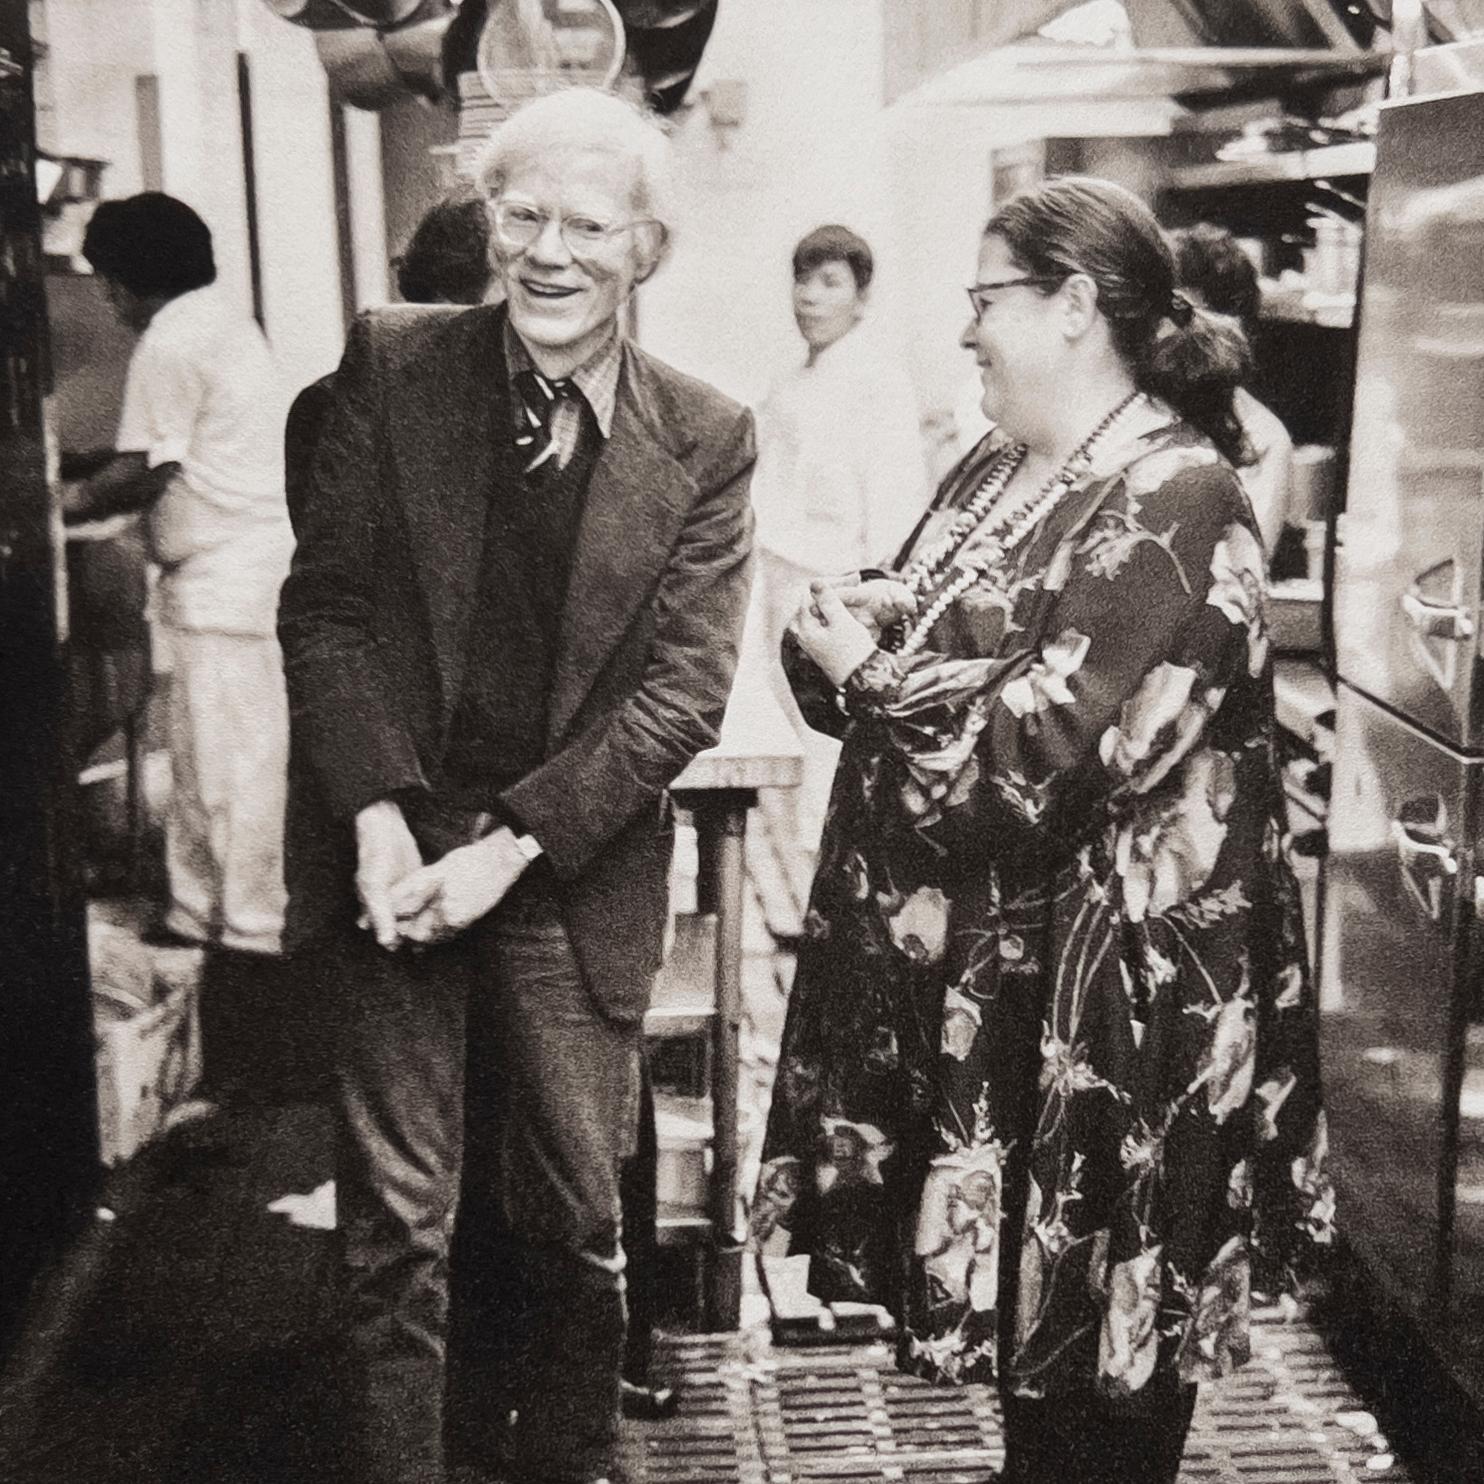 Elaine's Kitchen - Andy Warhol and Elaine,  New York, 1976 - Photograph by Jonathan Becker